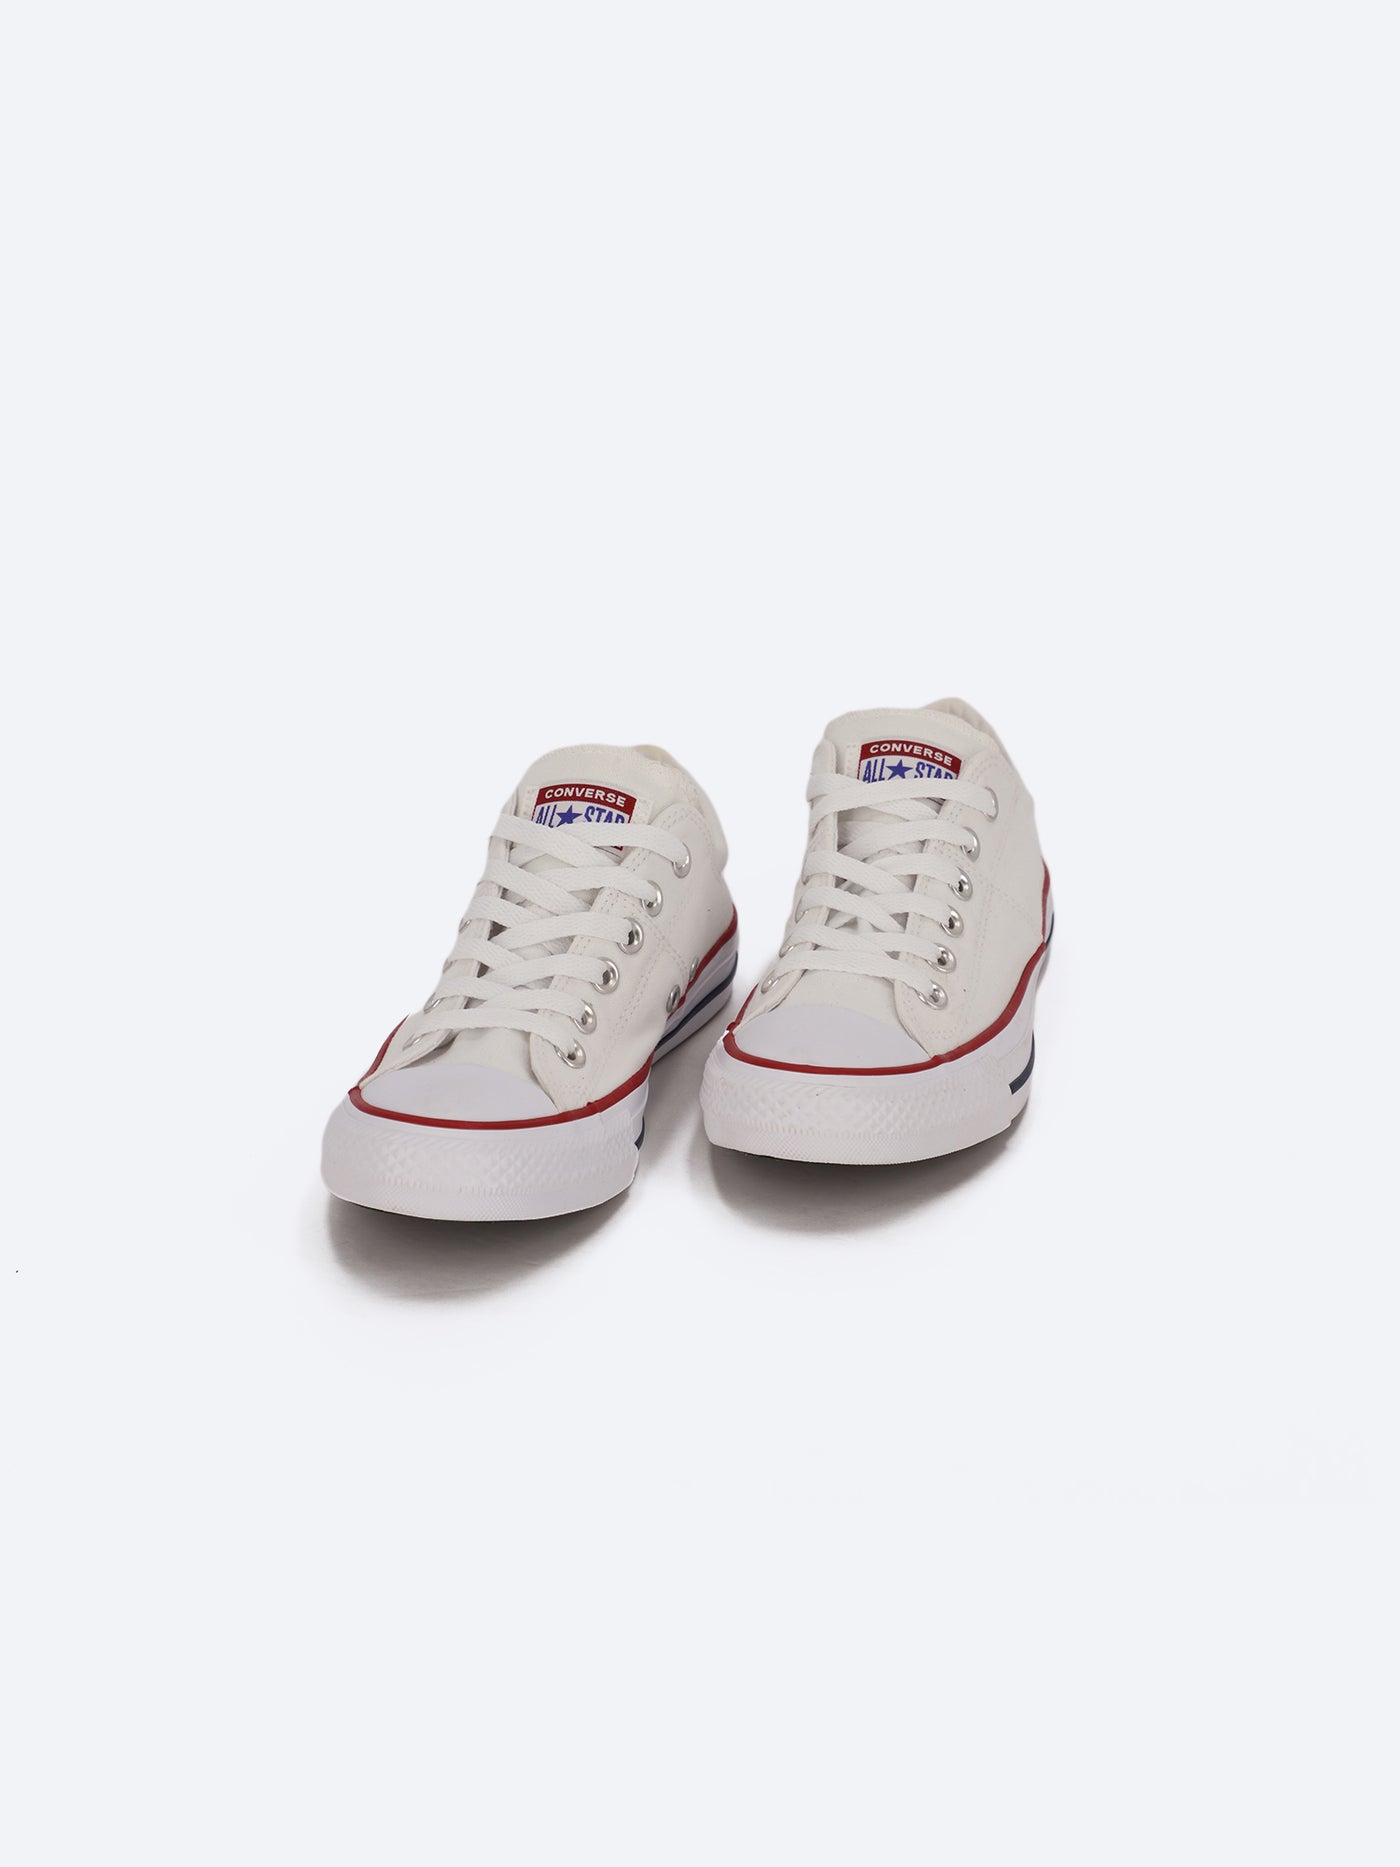 Women's Chuck Taylor All Star Madison Low Top Sneakers